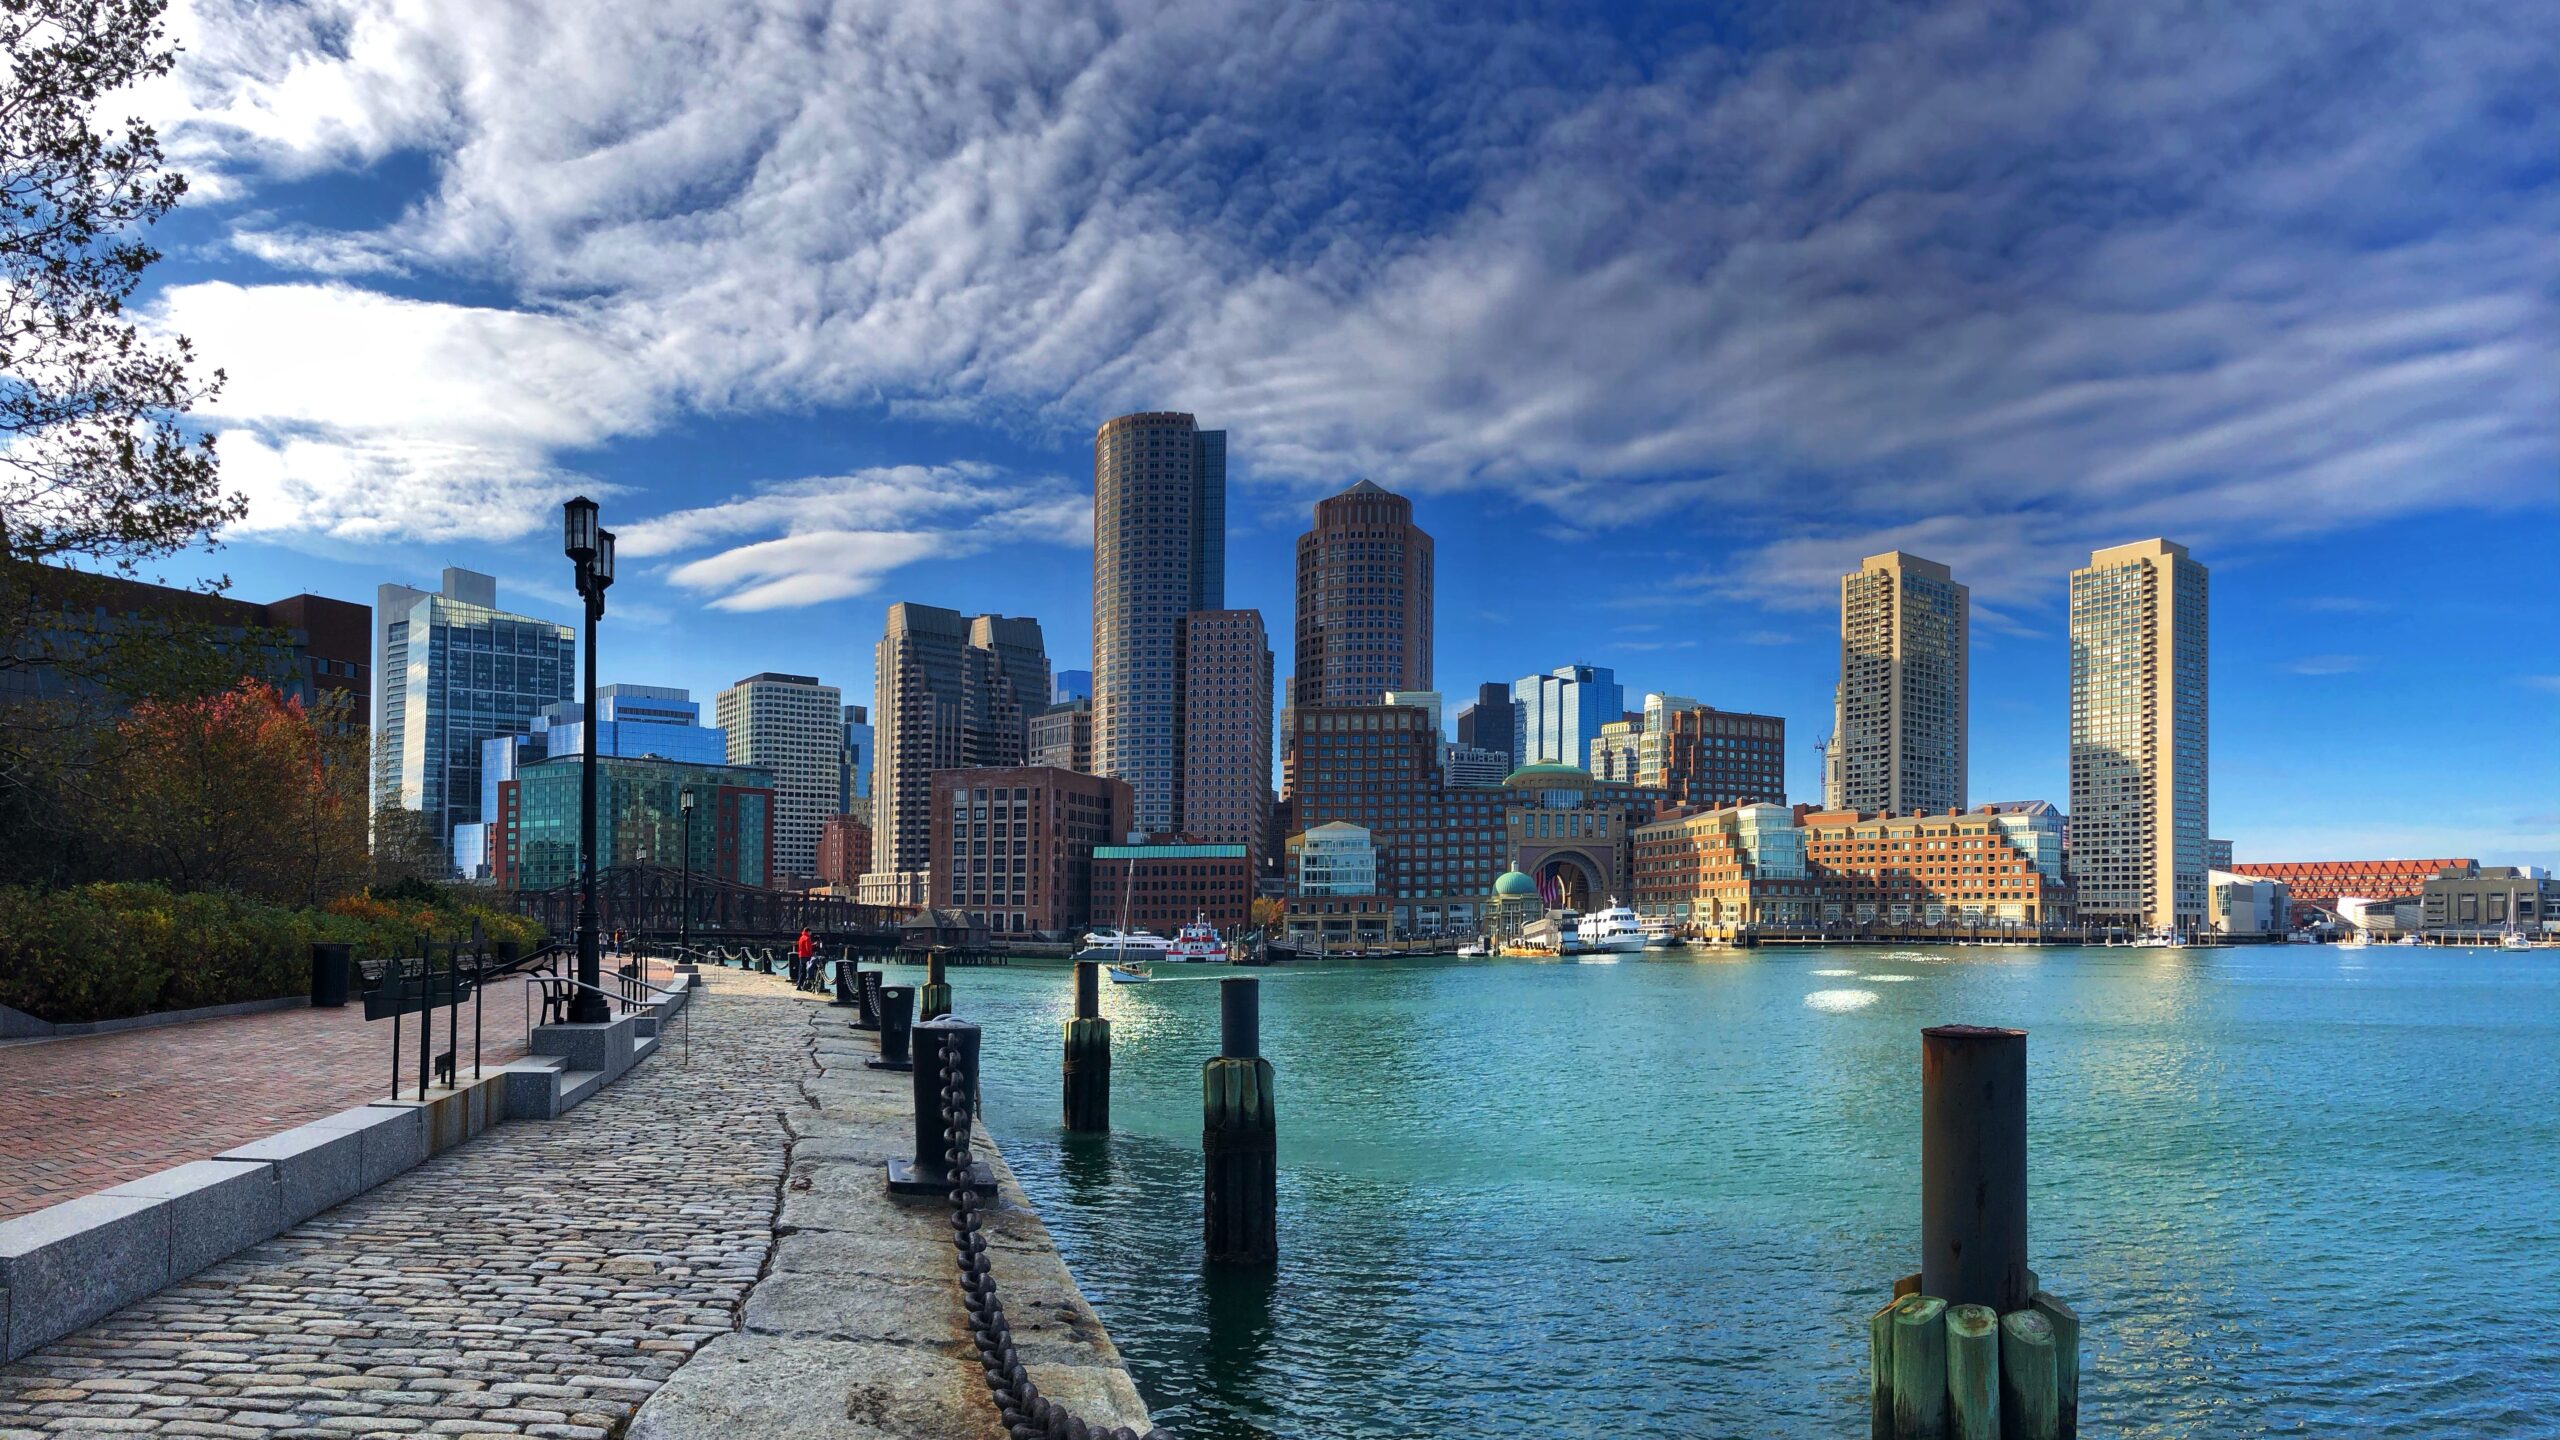 a view of Historic Sites of Boston from across the water